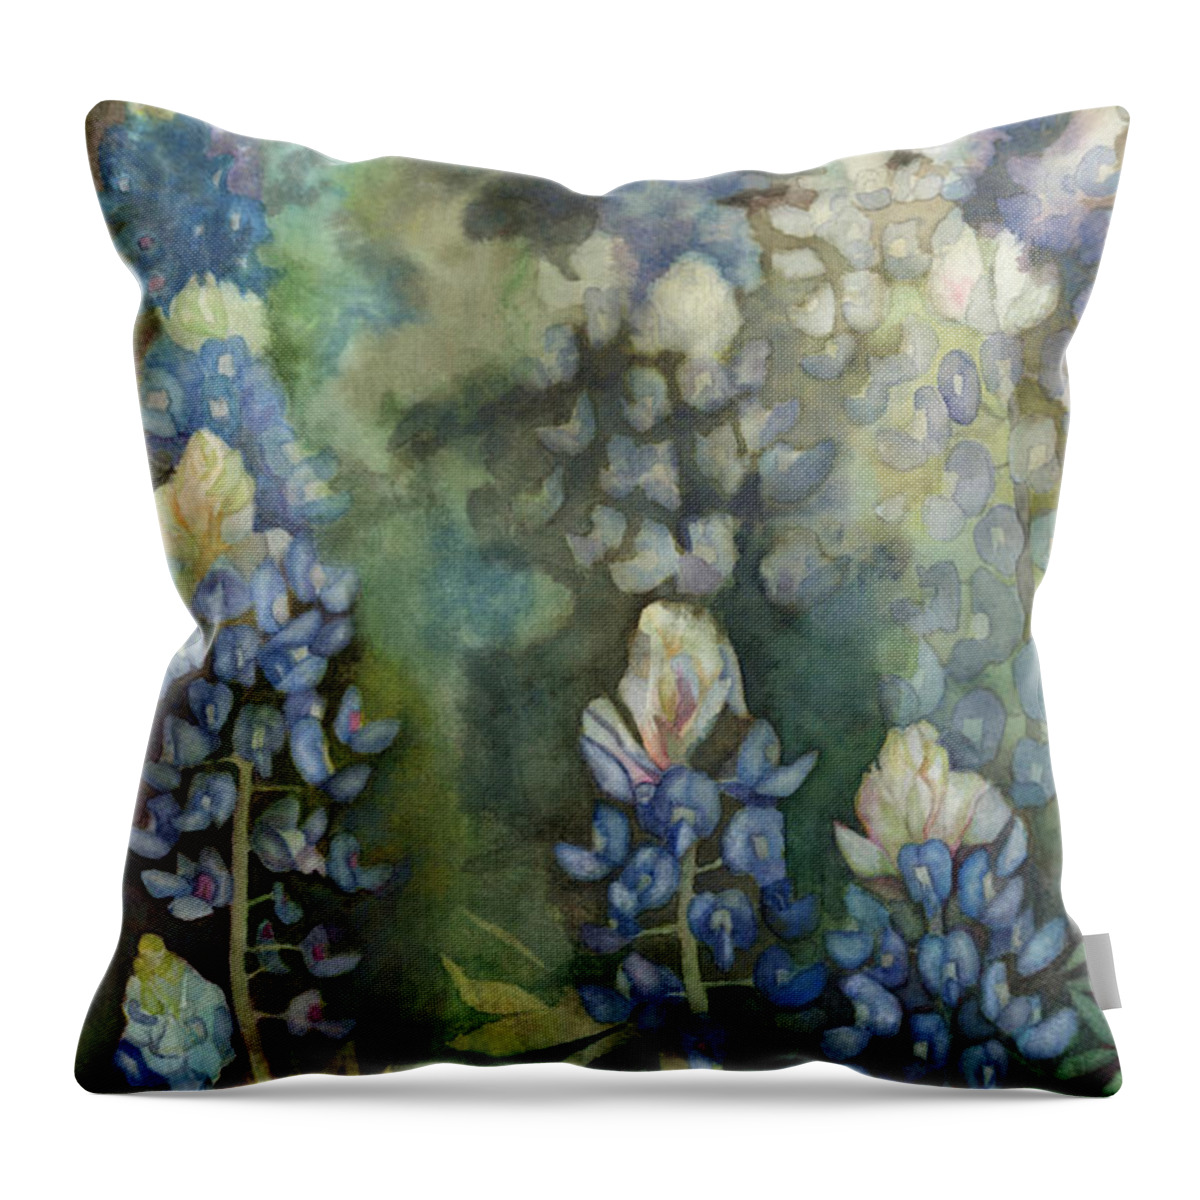 Bluebonnet Blue Flower Floral Texas Lone Star State Whimsical Throw Pillow featuring the painting Bluebonnet Blessing by Karen Kennedy Chatham